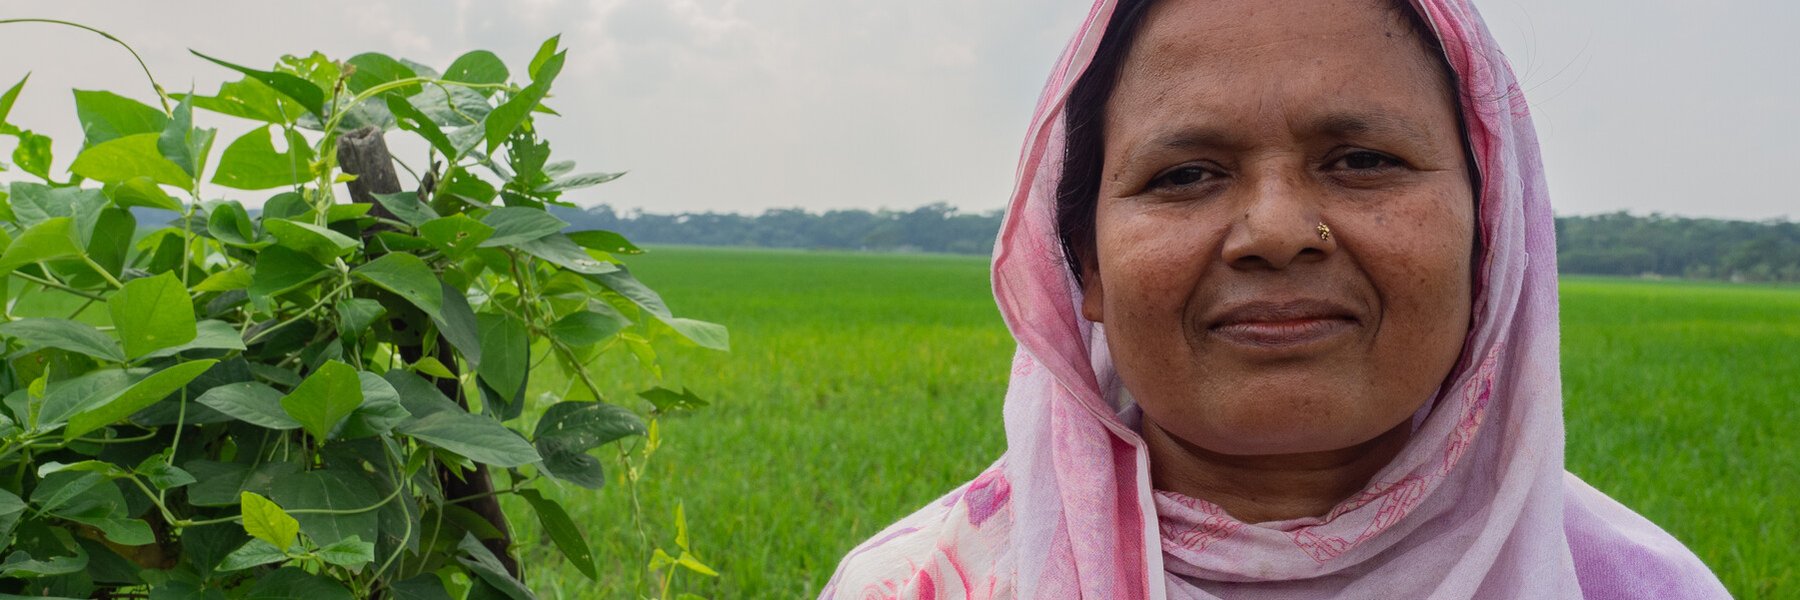 A smiling Bangladeshi woman in a pink shawl stands in the foreground with a luscious green field in the background.